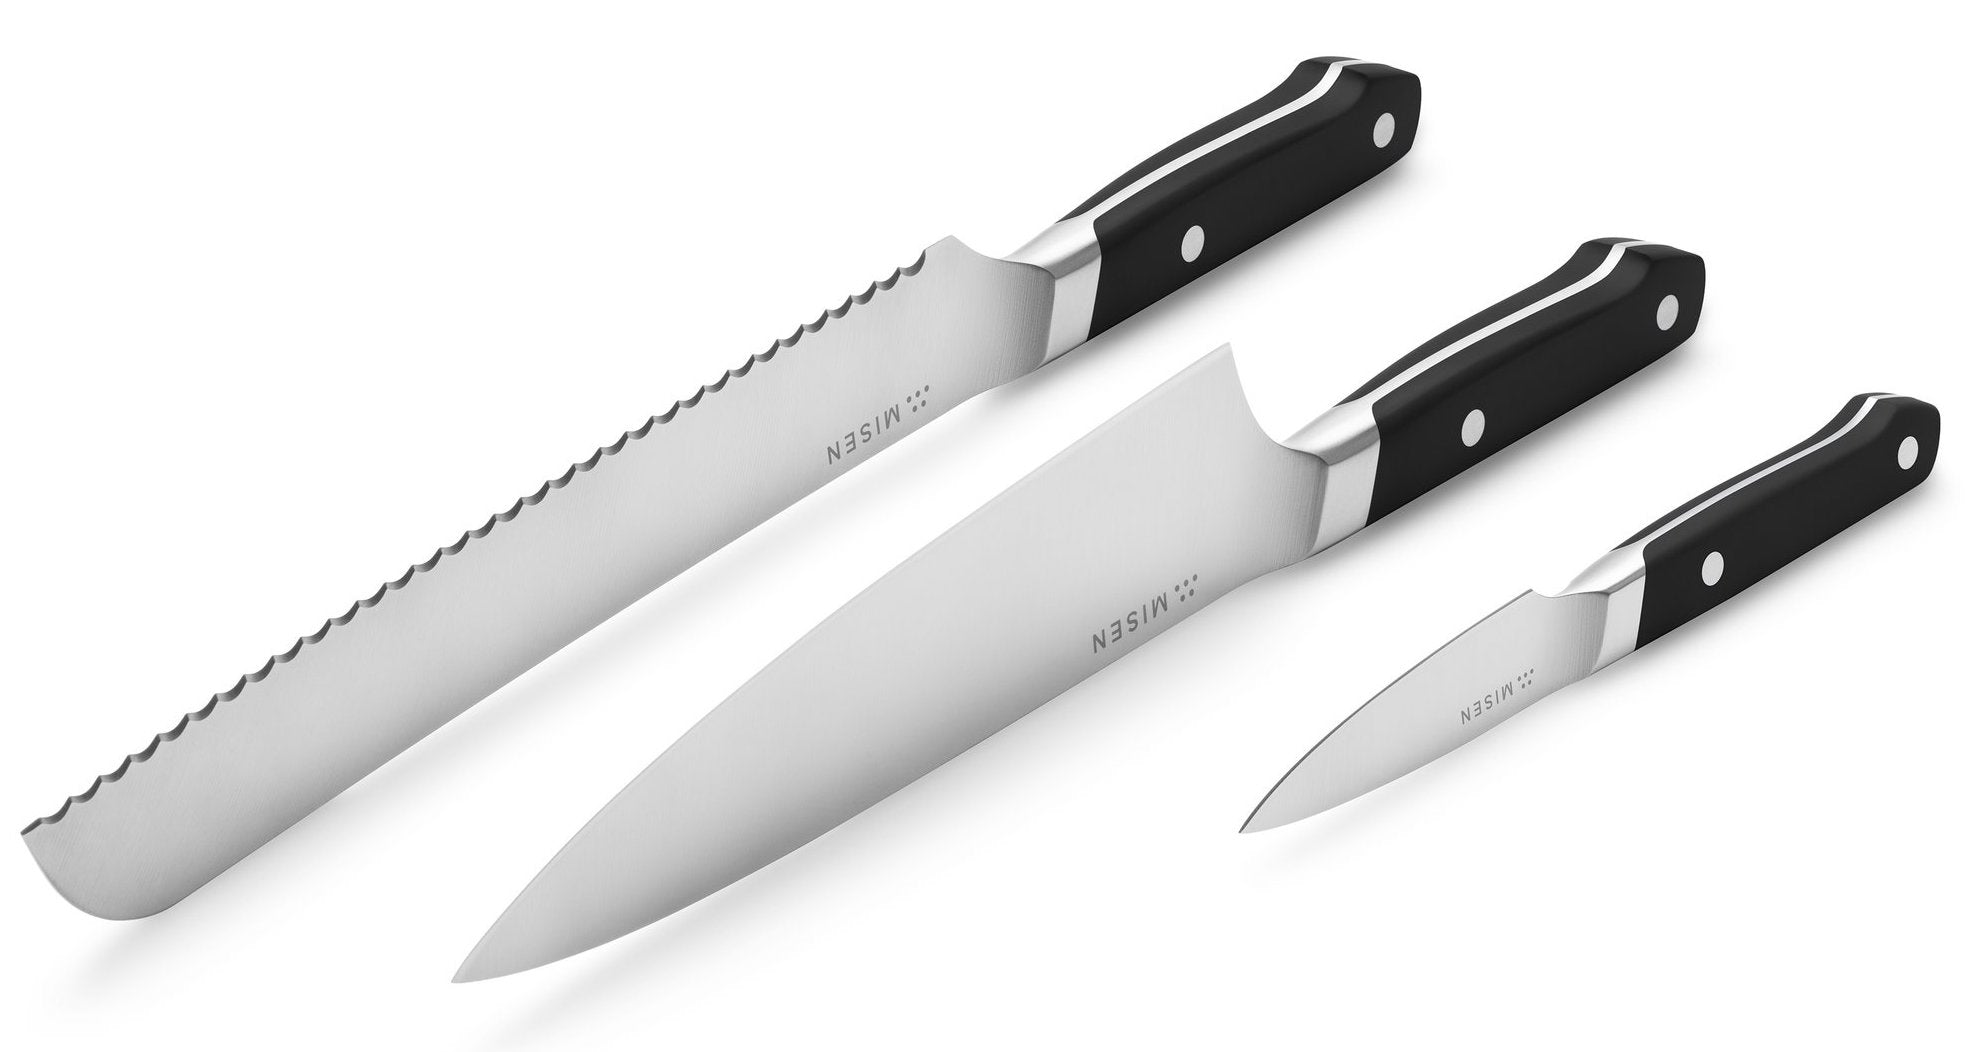 Knife Parts Guide: Identify the Cutting Edge, Heel, and More